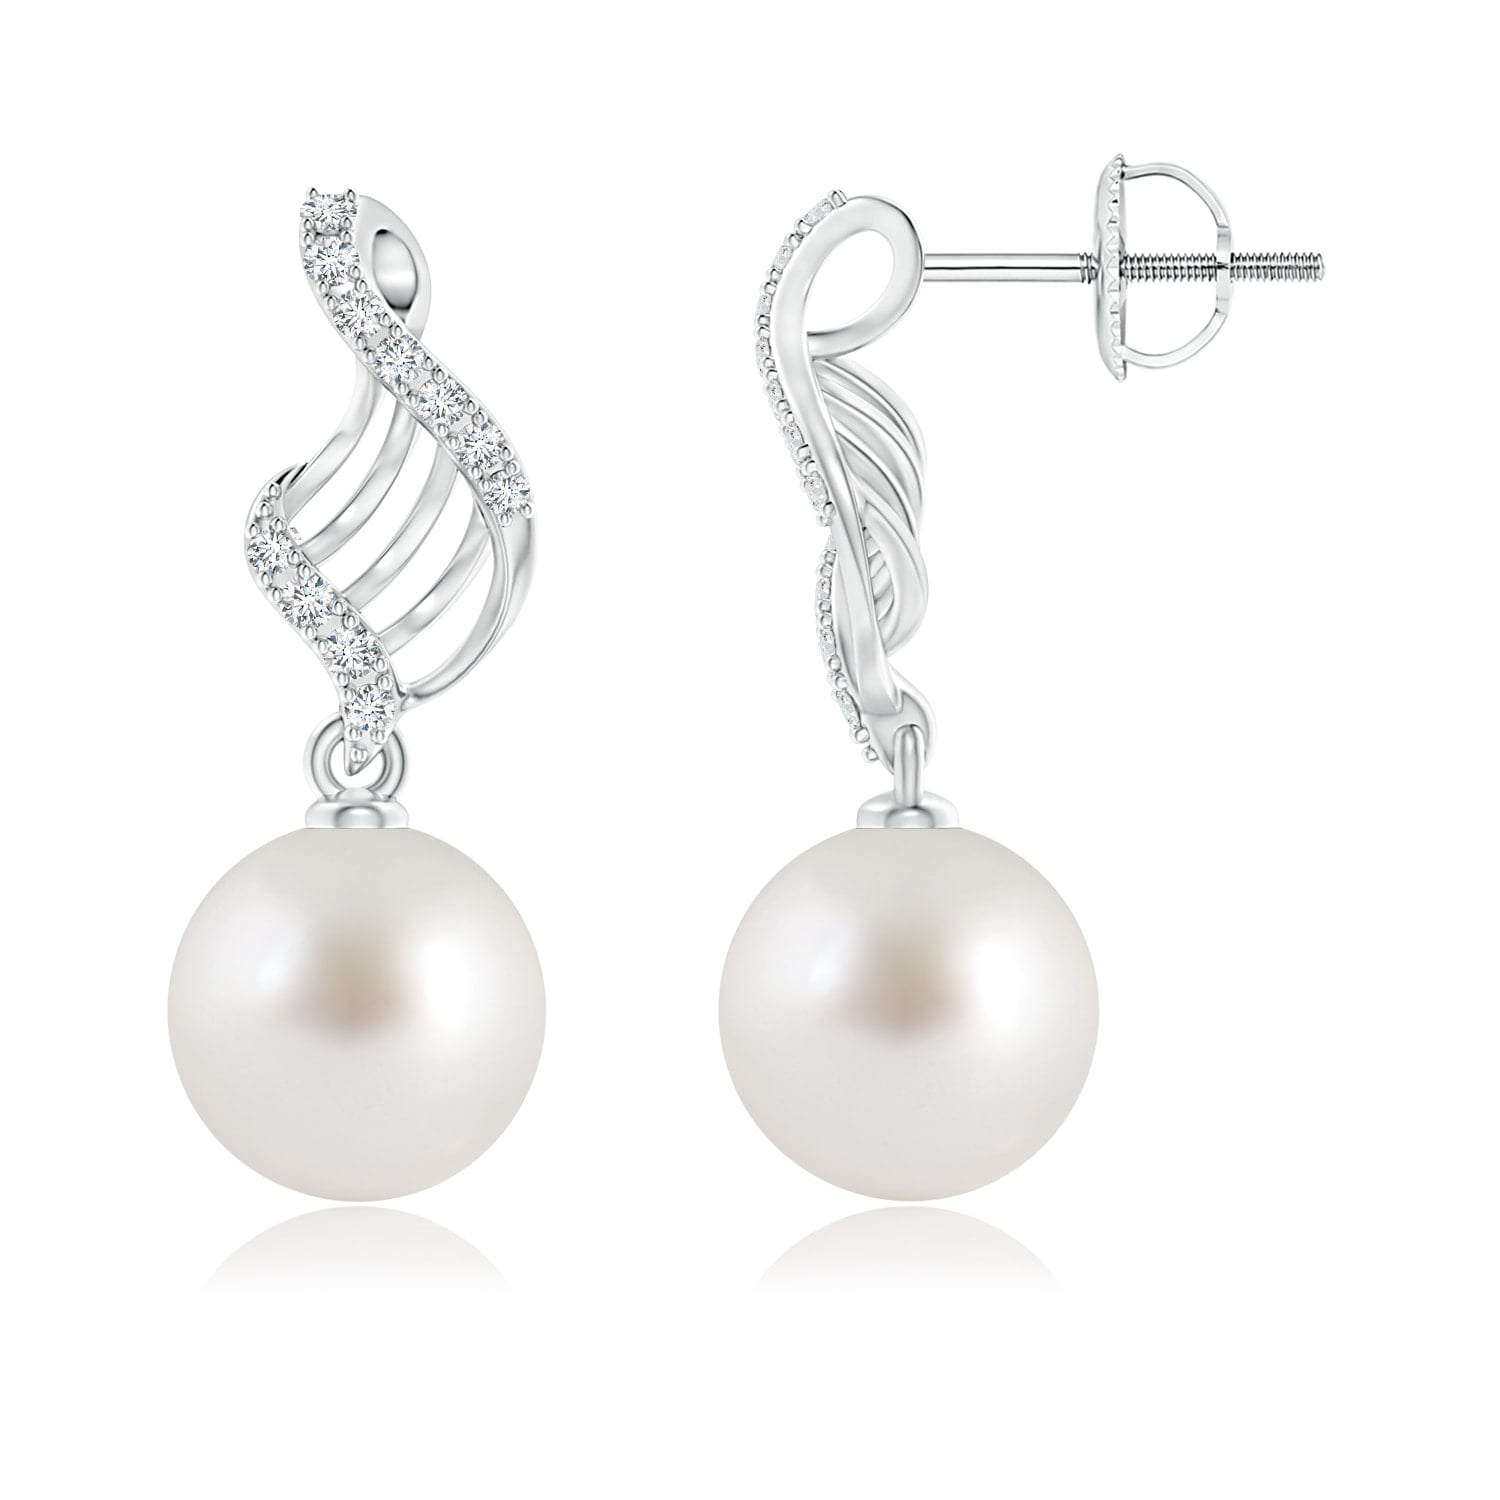 CHARMING PAIR OF 11-12MM SOUTH SEA GOLD INK PEARL EARRING 14K 